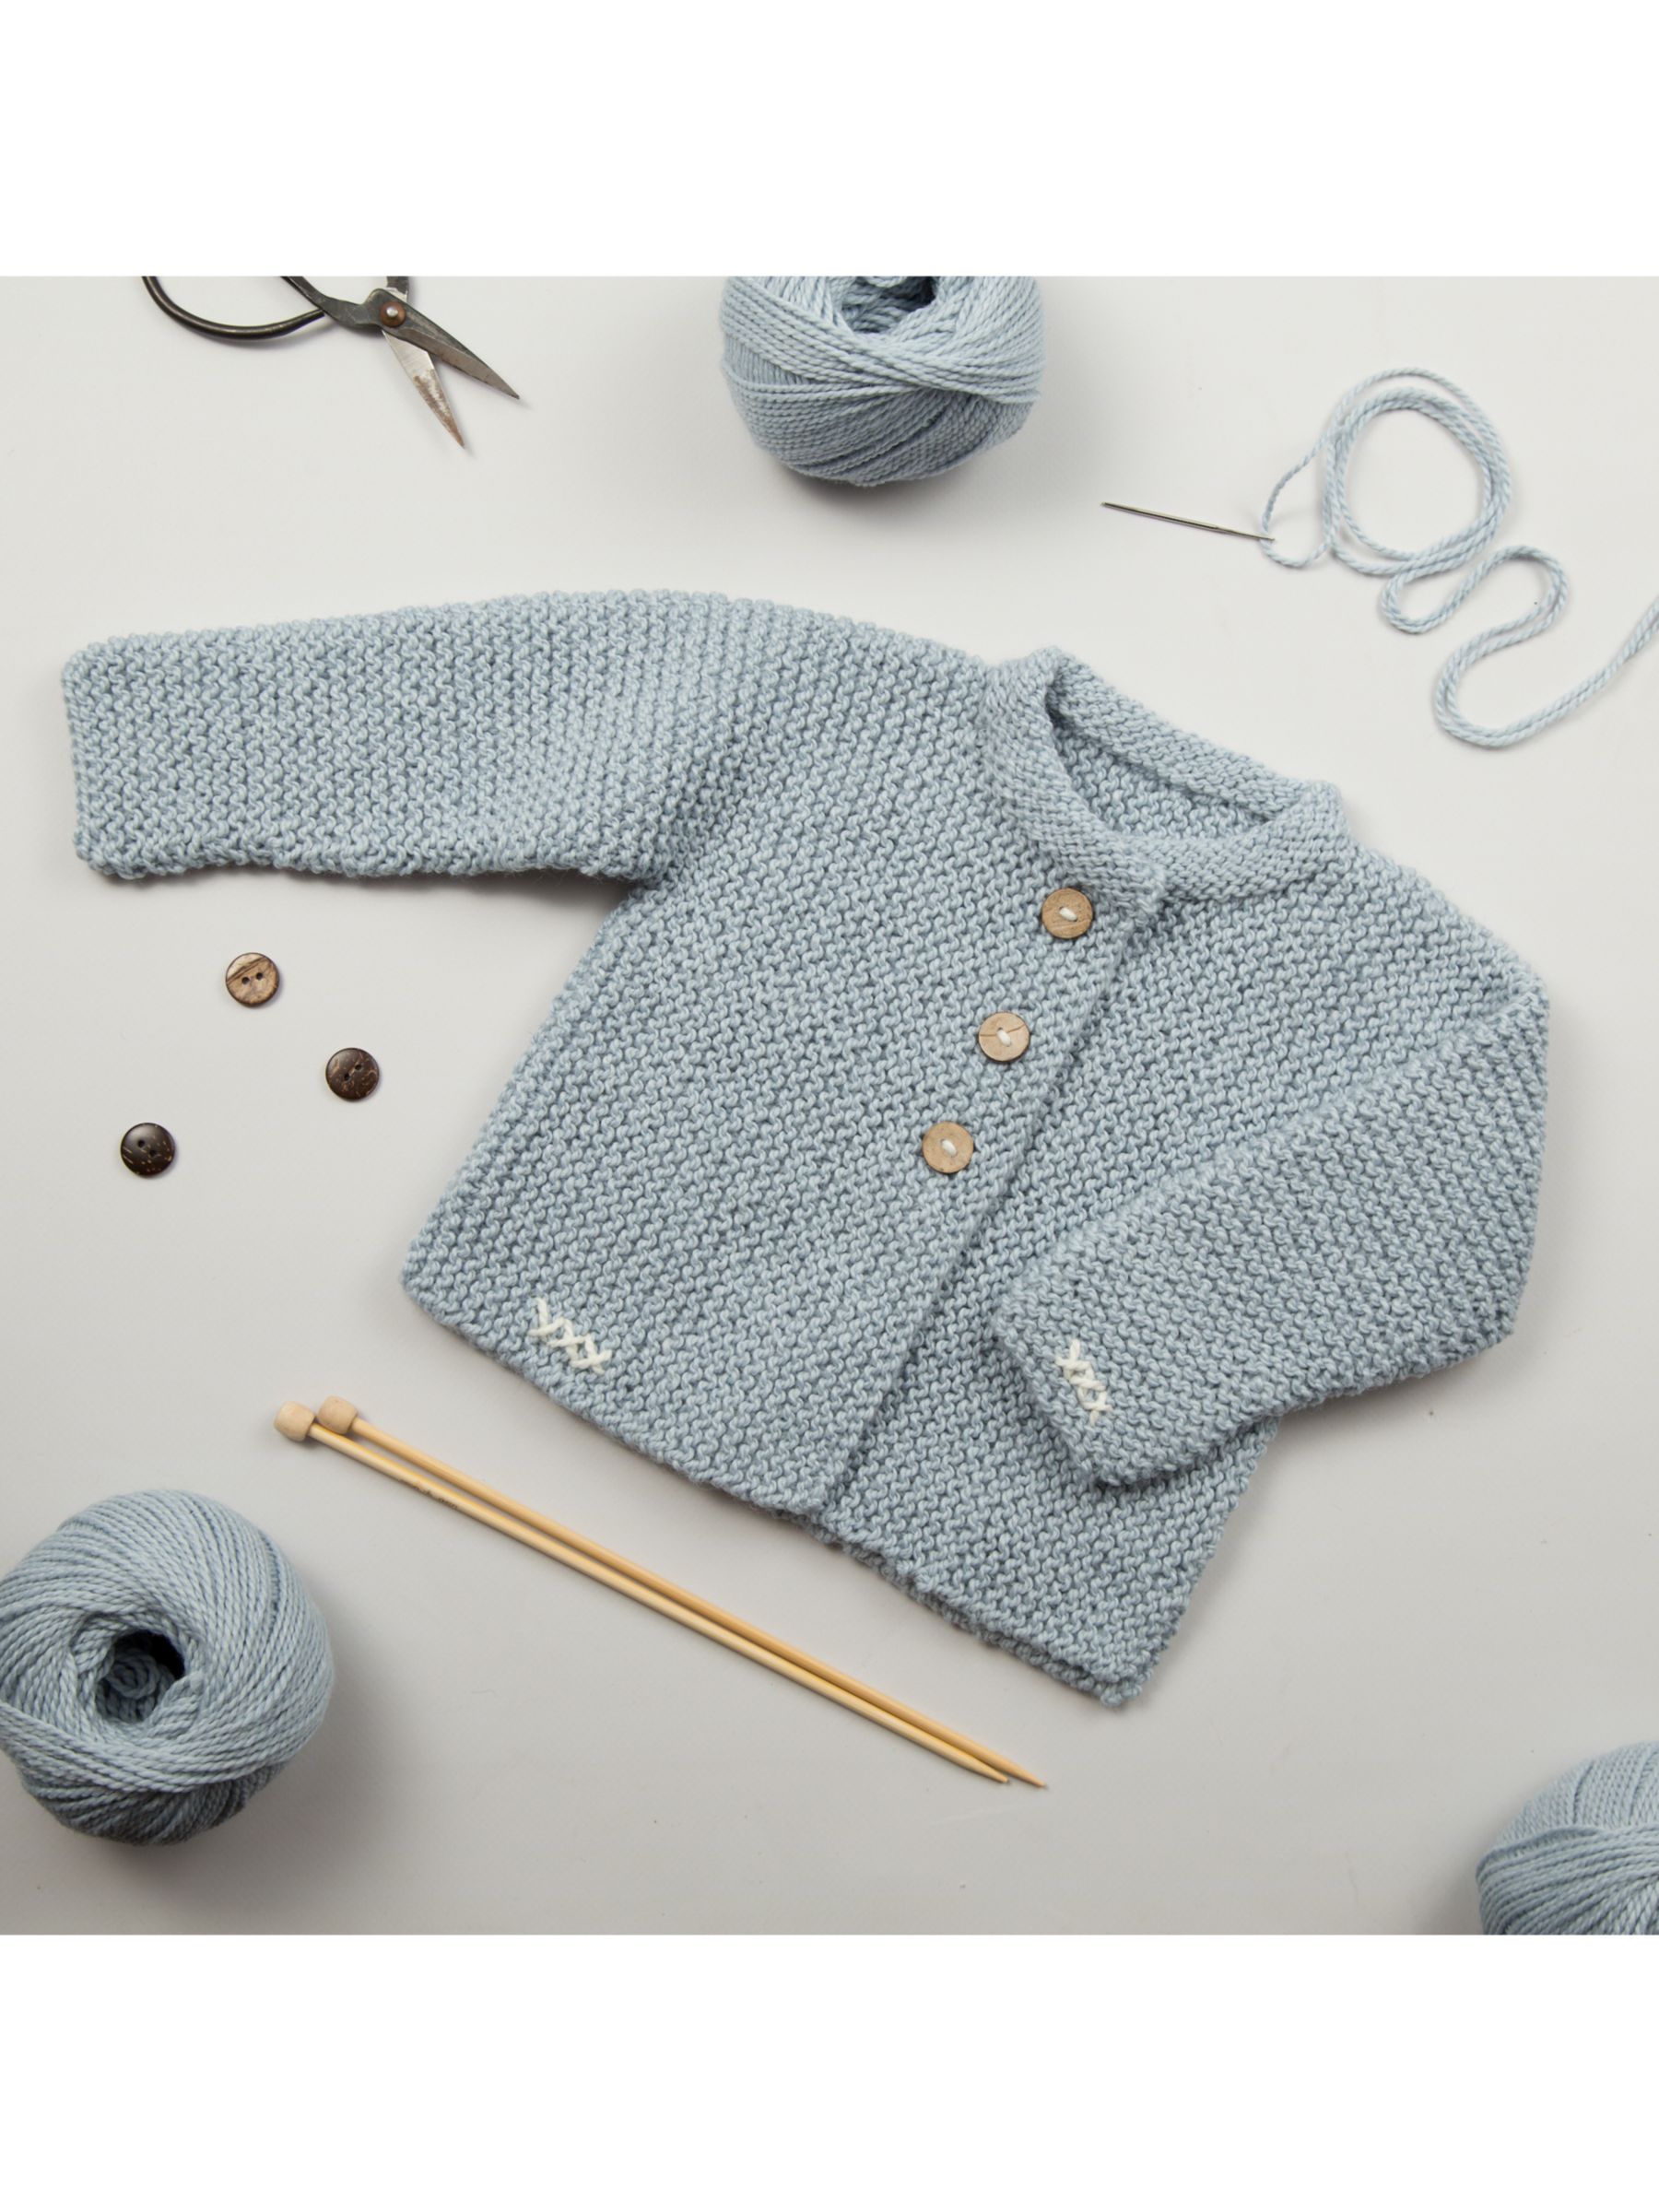 Wool Couture Lily Baby Cardigan Knitting Kit, Baby Blue, 0-3 Months